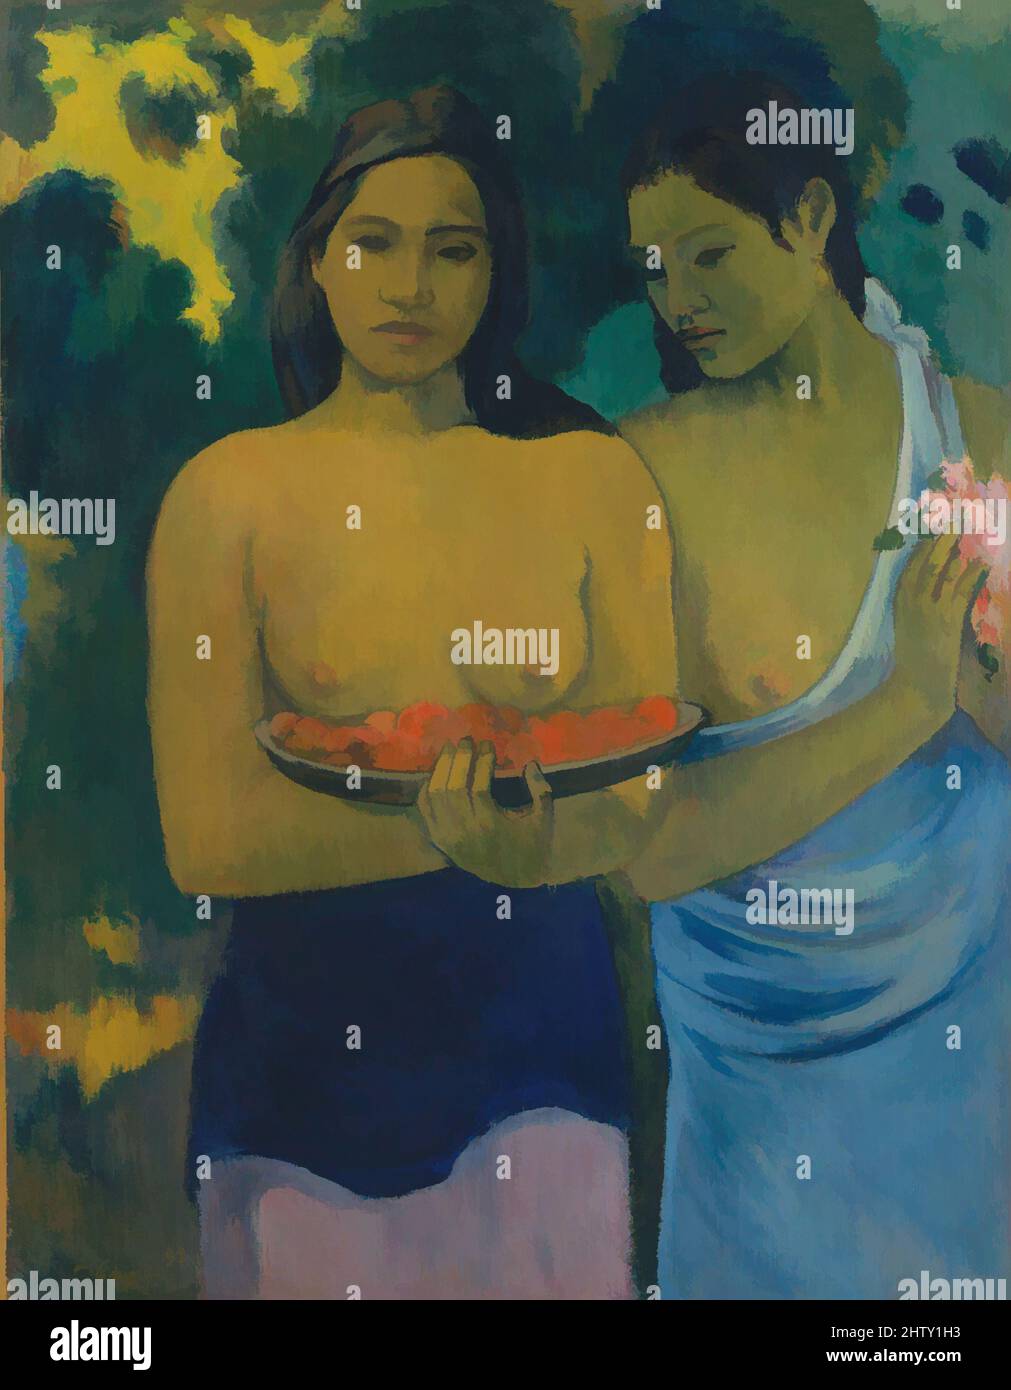 Art inspired by Two Tahitian Women, 1899, Oil on canvas, 37 x 28 1/2 in. (94 x 72.4 cm), Paintings, Paul Gauguin (French, Paris 1848–1903 Atuona, Hiva Oa, Marquesas Islands), As Gauguin brought his work in Tahiti to a close, he focused increasingly on the beauty and serene virtues of, Classic works modernized by Artotop with a splash of modernity. Shapes, color and value, eye-catching visual impact on art. Emotions through freedom of artworks in a contemporary way. A timeless message pursuing a wildly creative new direction. Artists turning to the digital medium and creating the Artotop NFT Stock Photo